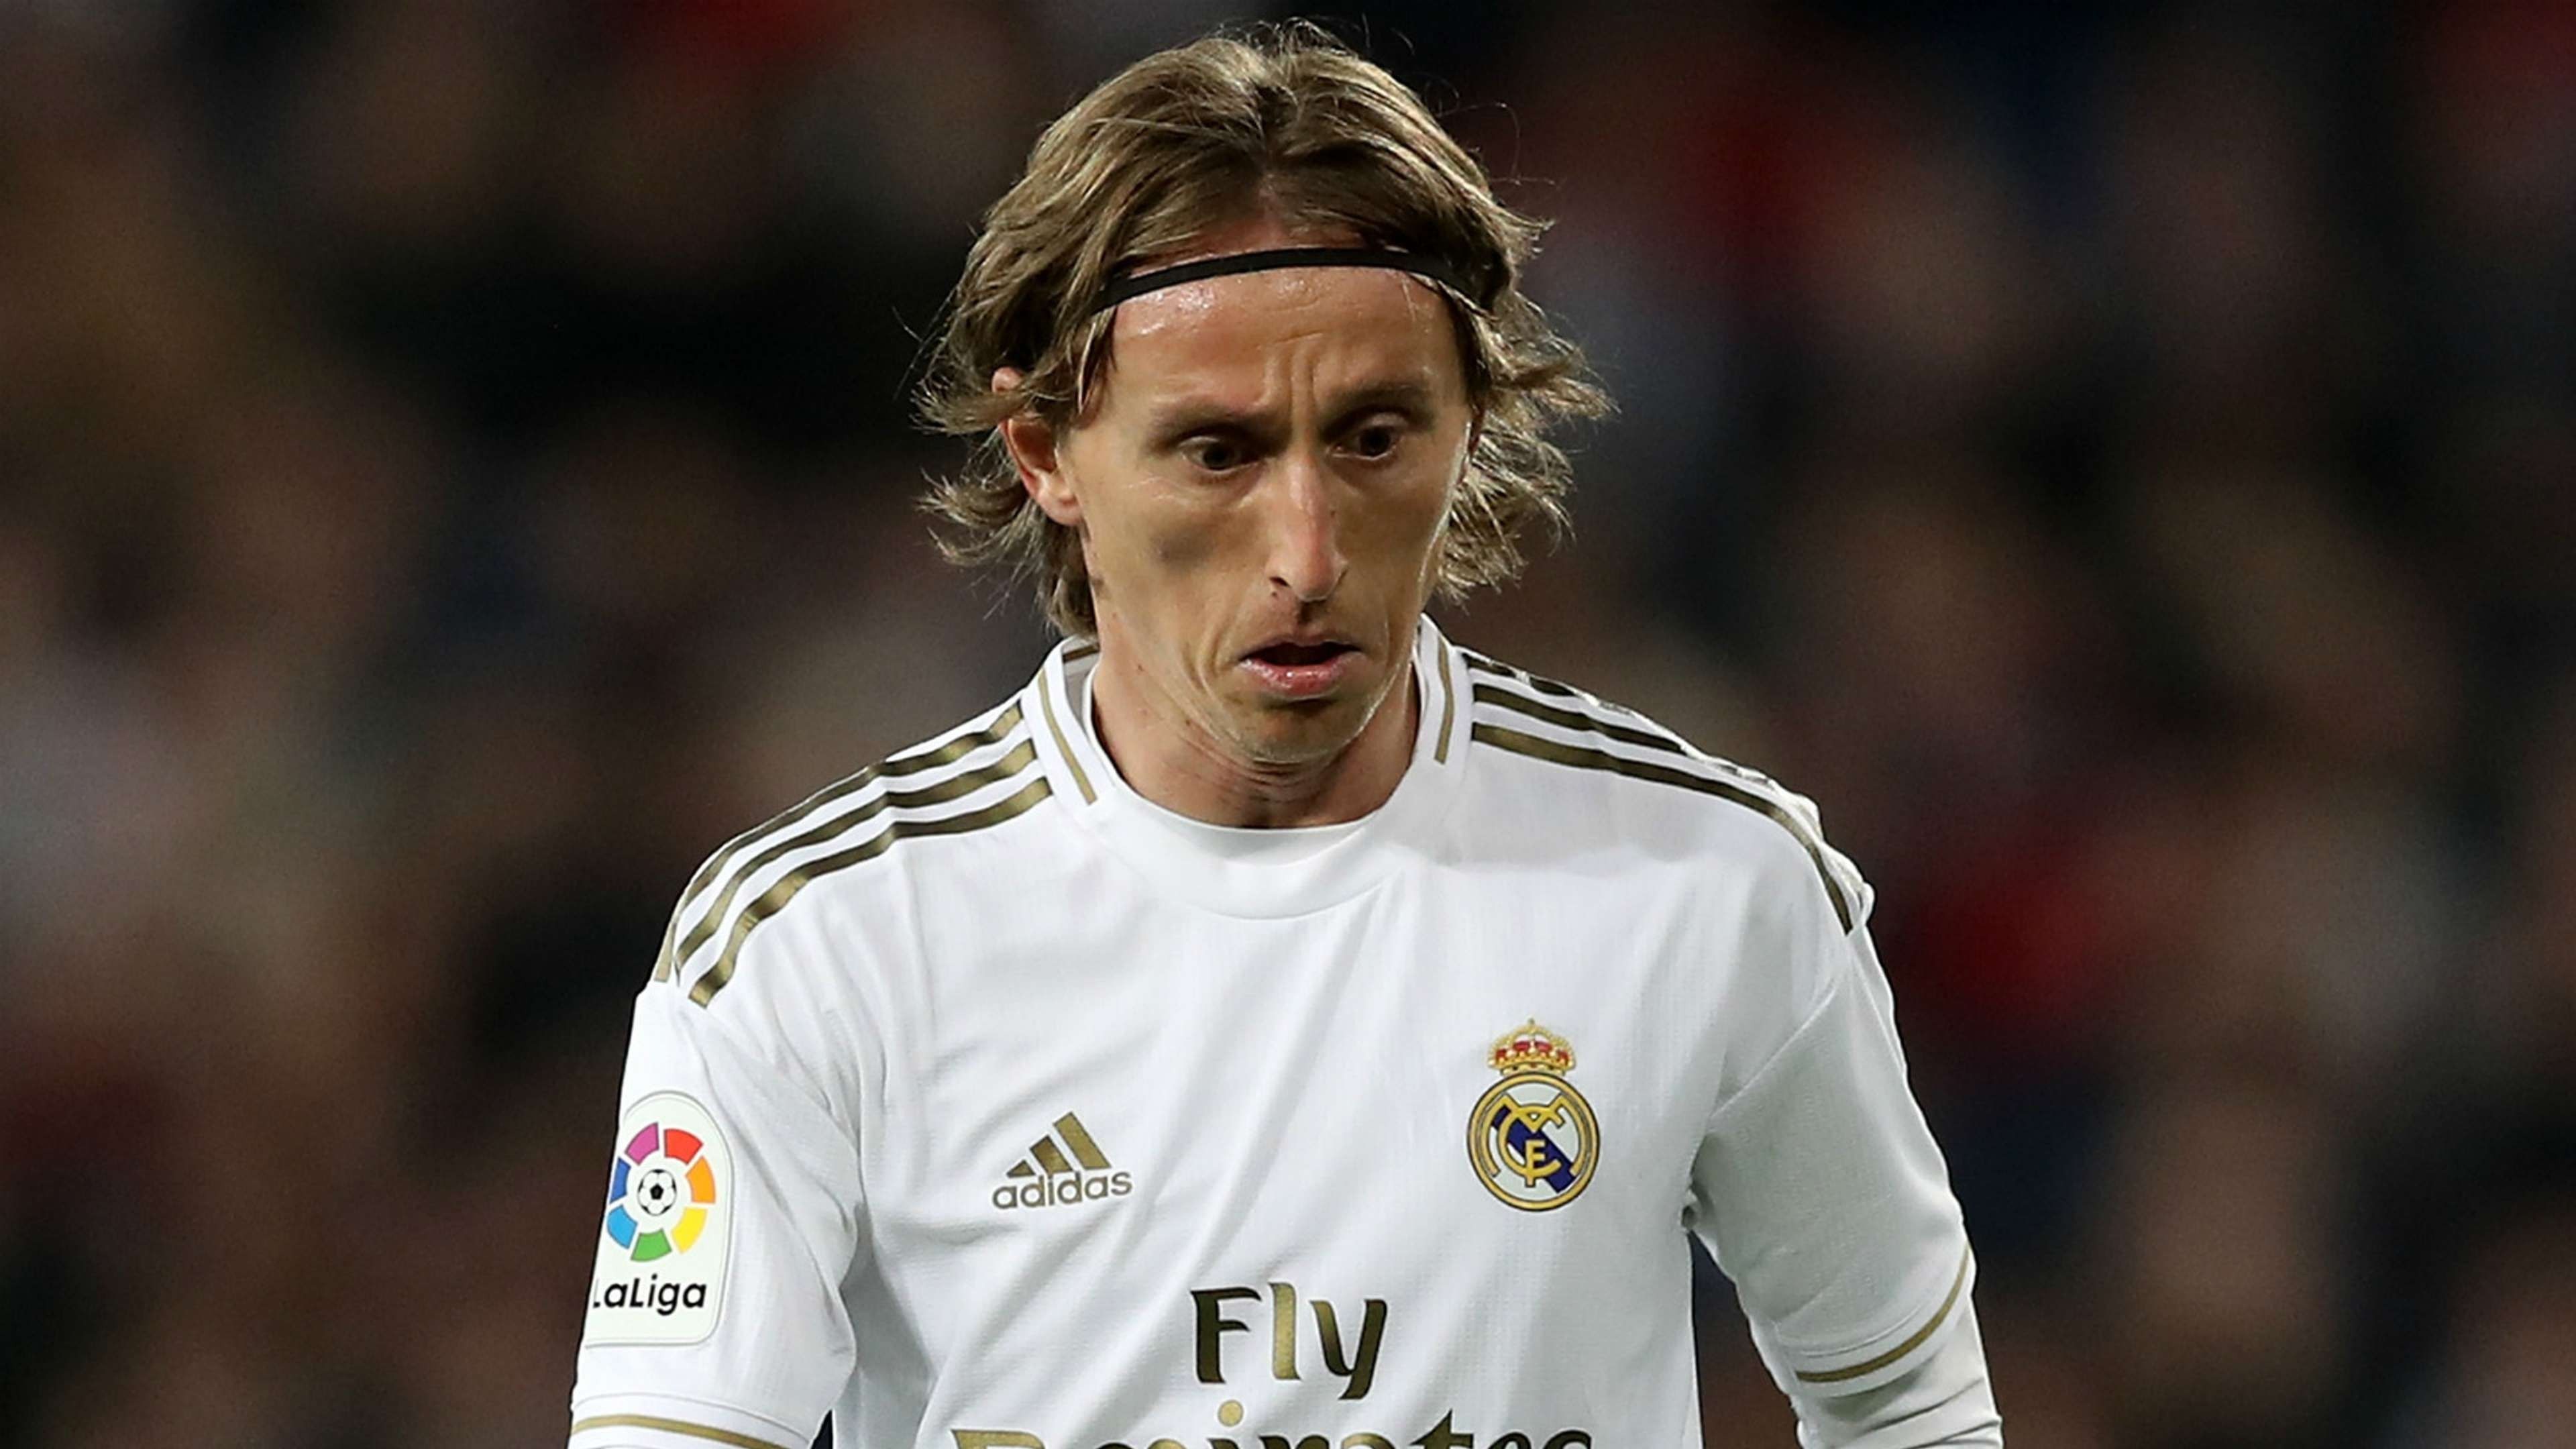 Real Madrid Do Not Intend To Extend Contract With Modric